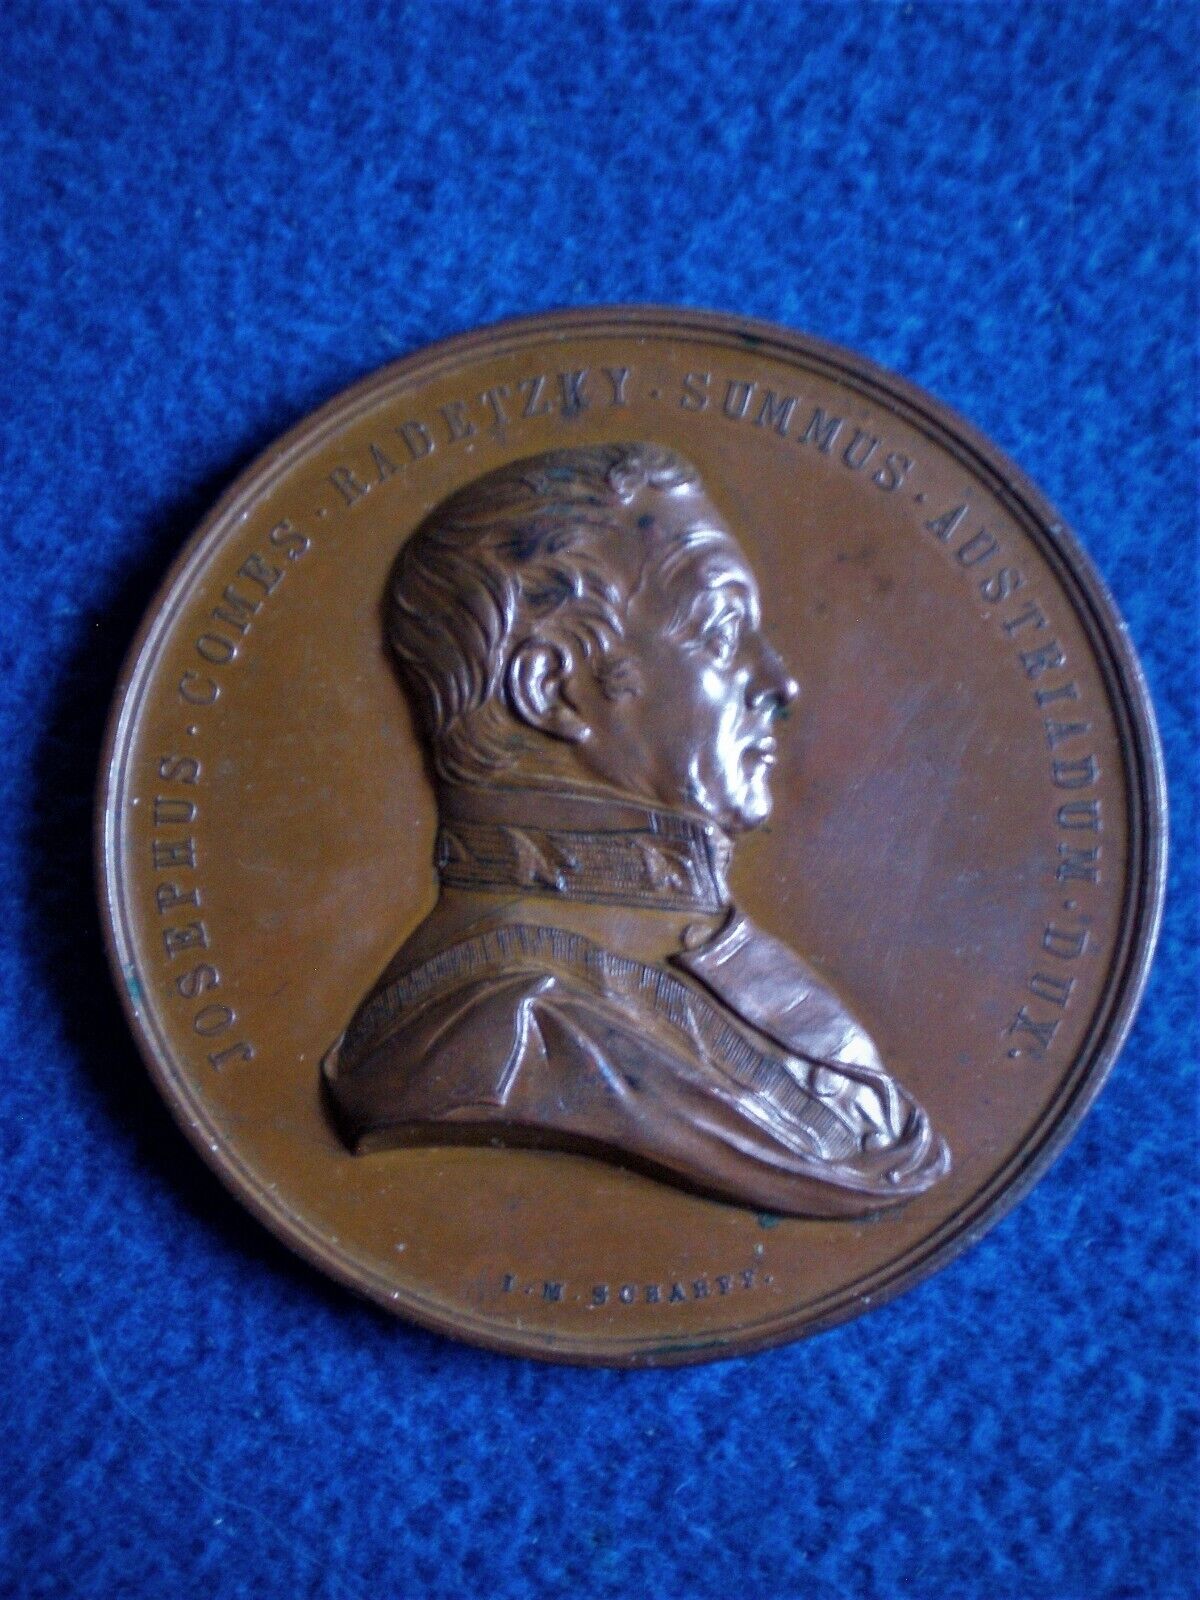 Austria: Medal in Honor of Joseph Radetzky and the Campaign in Italy 1848-1849